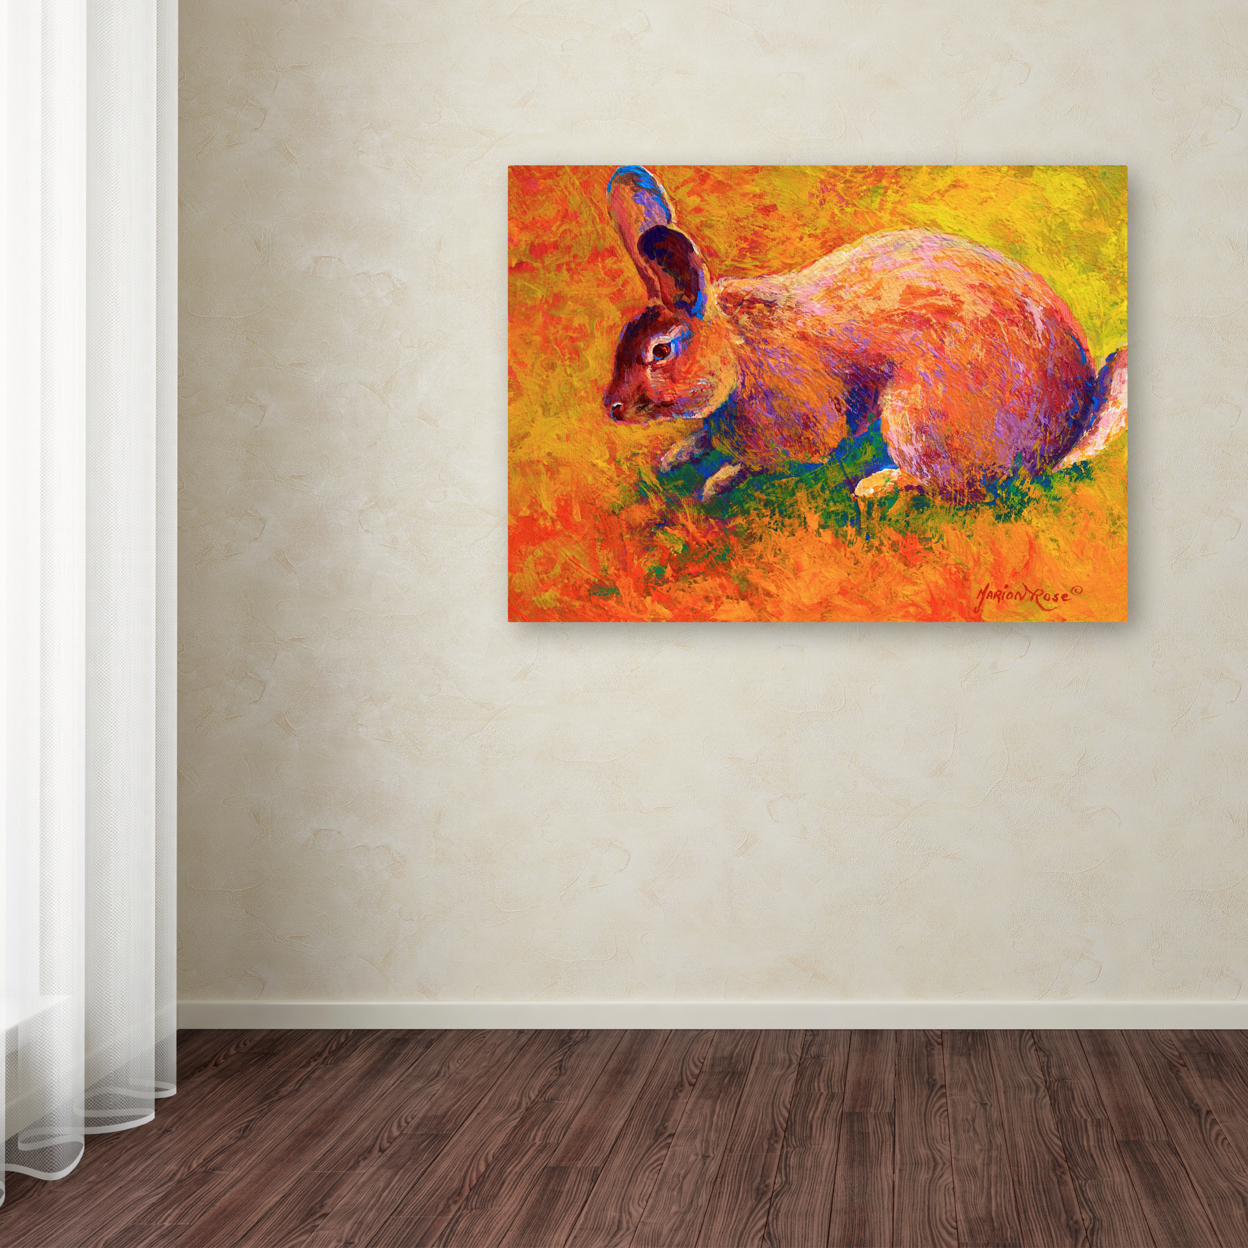 Marion Rose 'Rabbit 1' Ready To Hang Canvas Art 24 X 32 Inches Made In USA